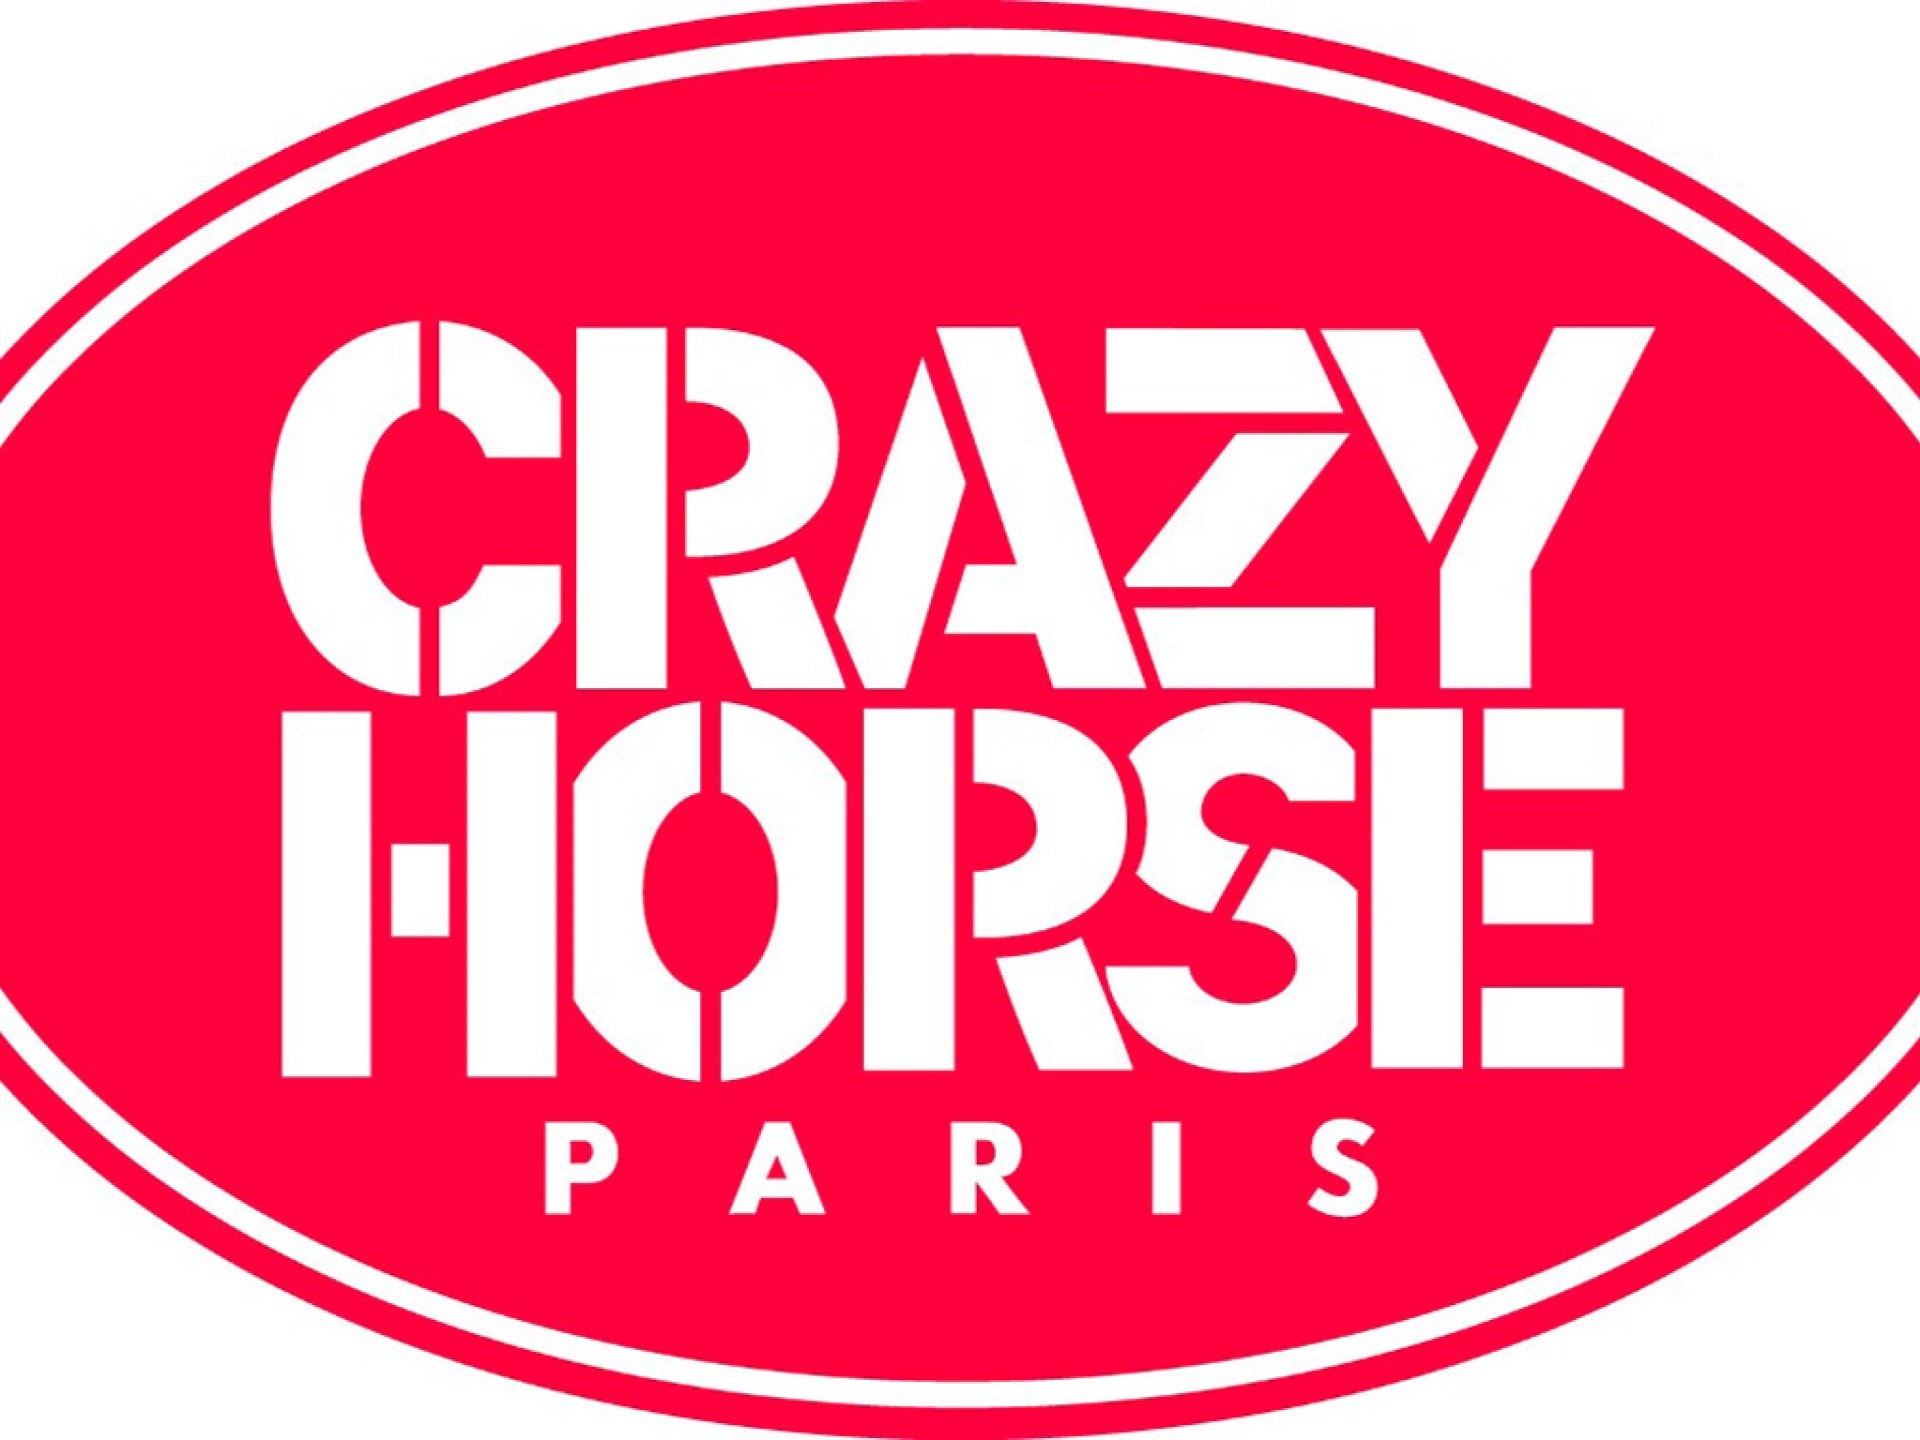 Crazy Horse Exclusive Show VIP Private Booth